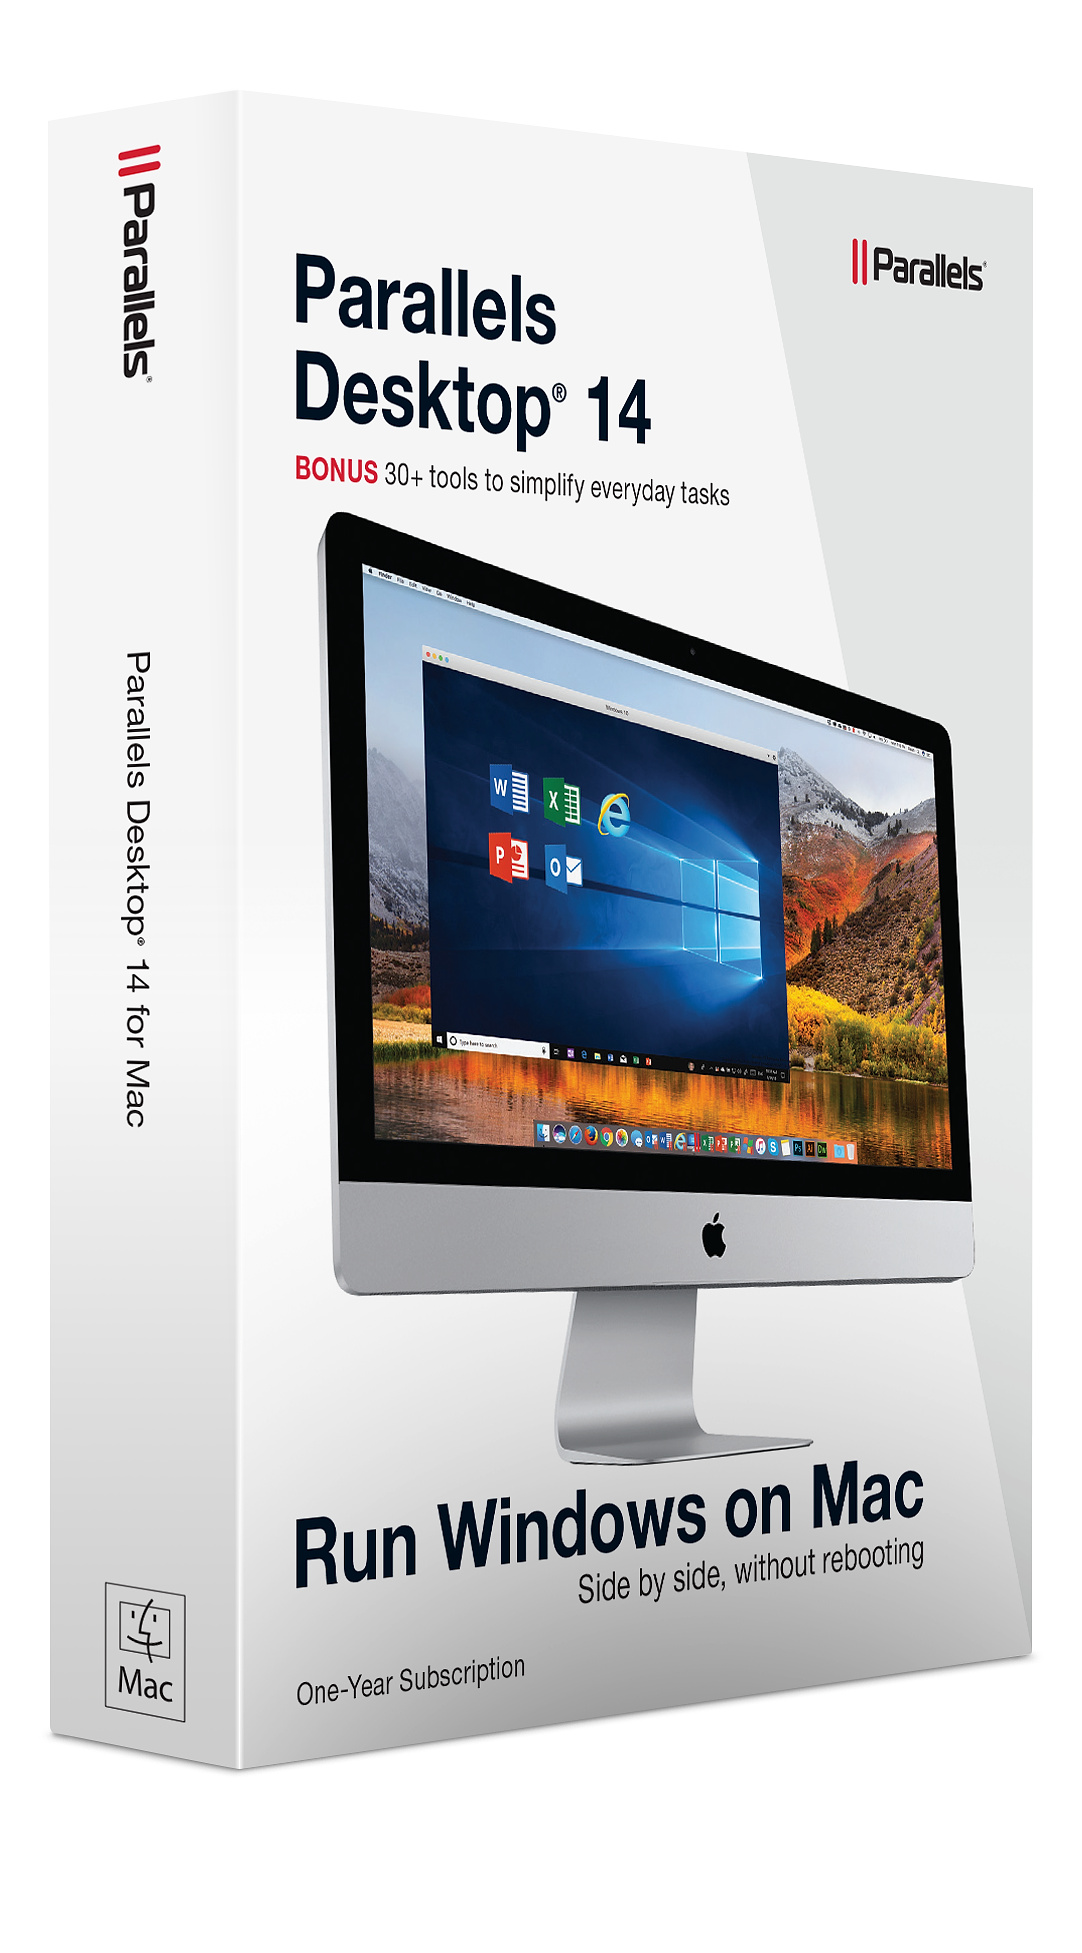 ico mac os for parallels